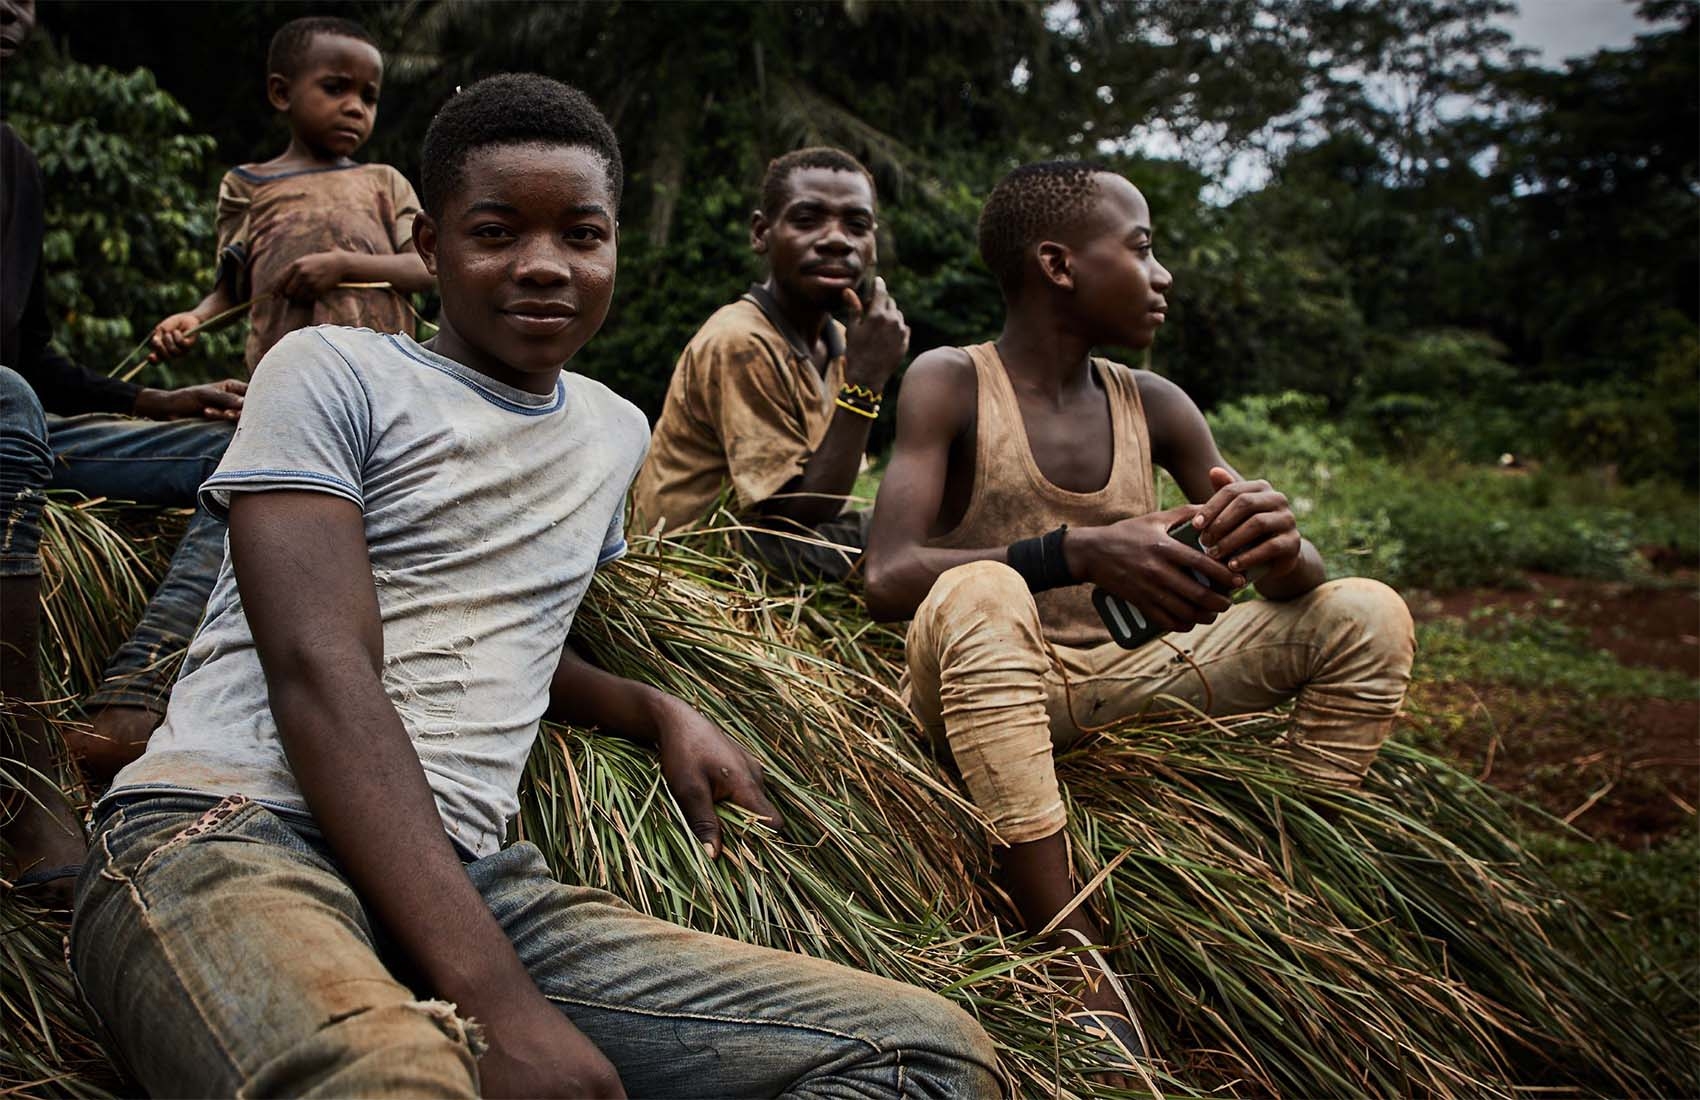 DRC, a group of kids sit together on the side of a hill